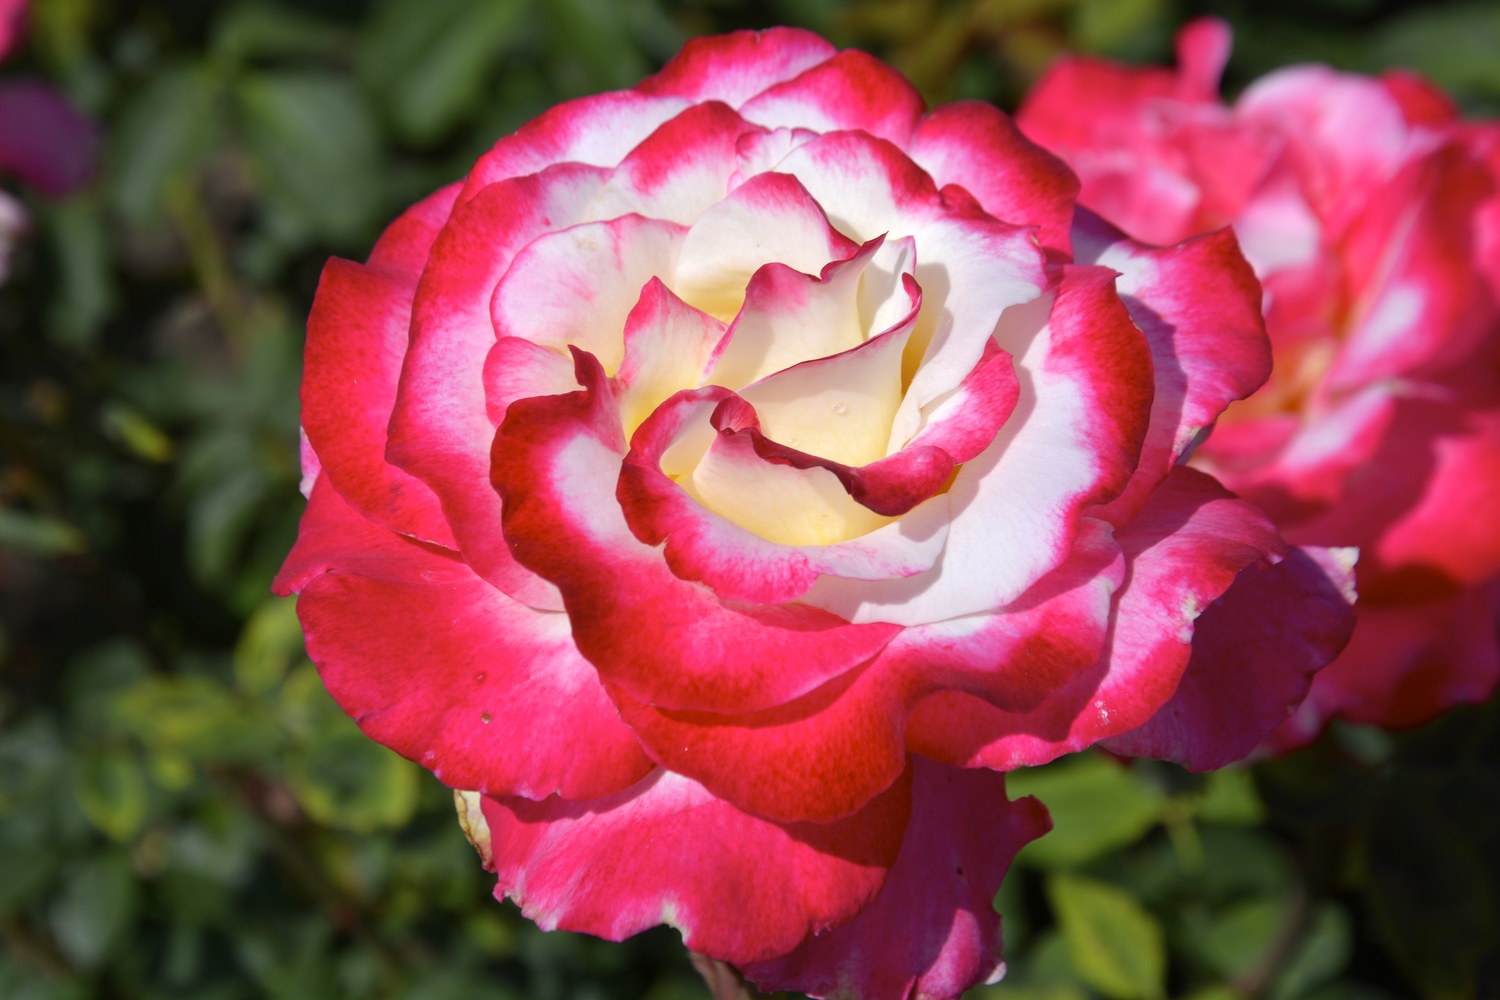 Easiest Roses To Grow: Foolproof Rose Growing Guide - Plant Instructions